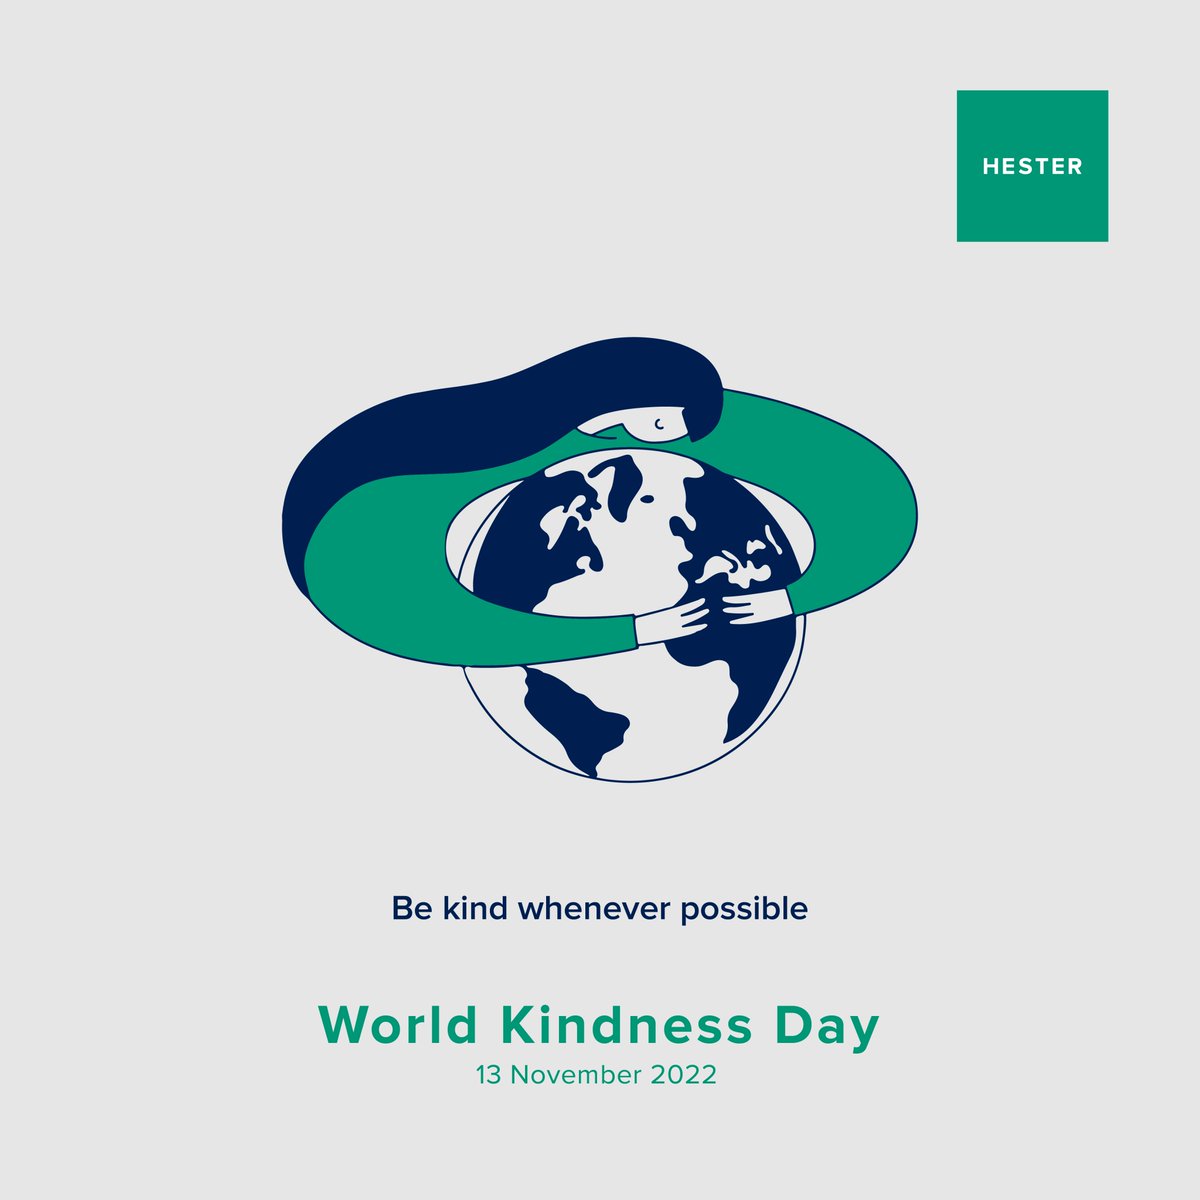 #Kindness is the first step towards a healthy approach for one health. This #WorldKindnessDay, let’s vouch to be kinder and more compassionate towards all living organisms alike.

#Hester #BeKindToAnimals #BetterAnimalHealth #AnimalHeath #PoultryHealth #PetHealth #HesterProducts